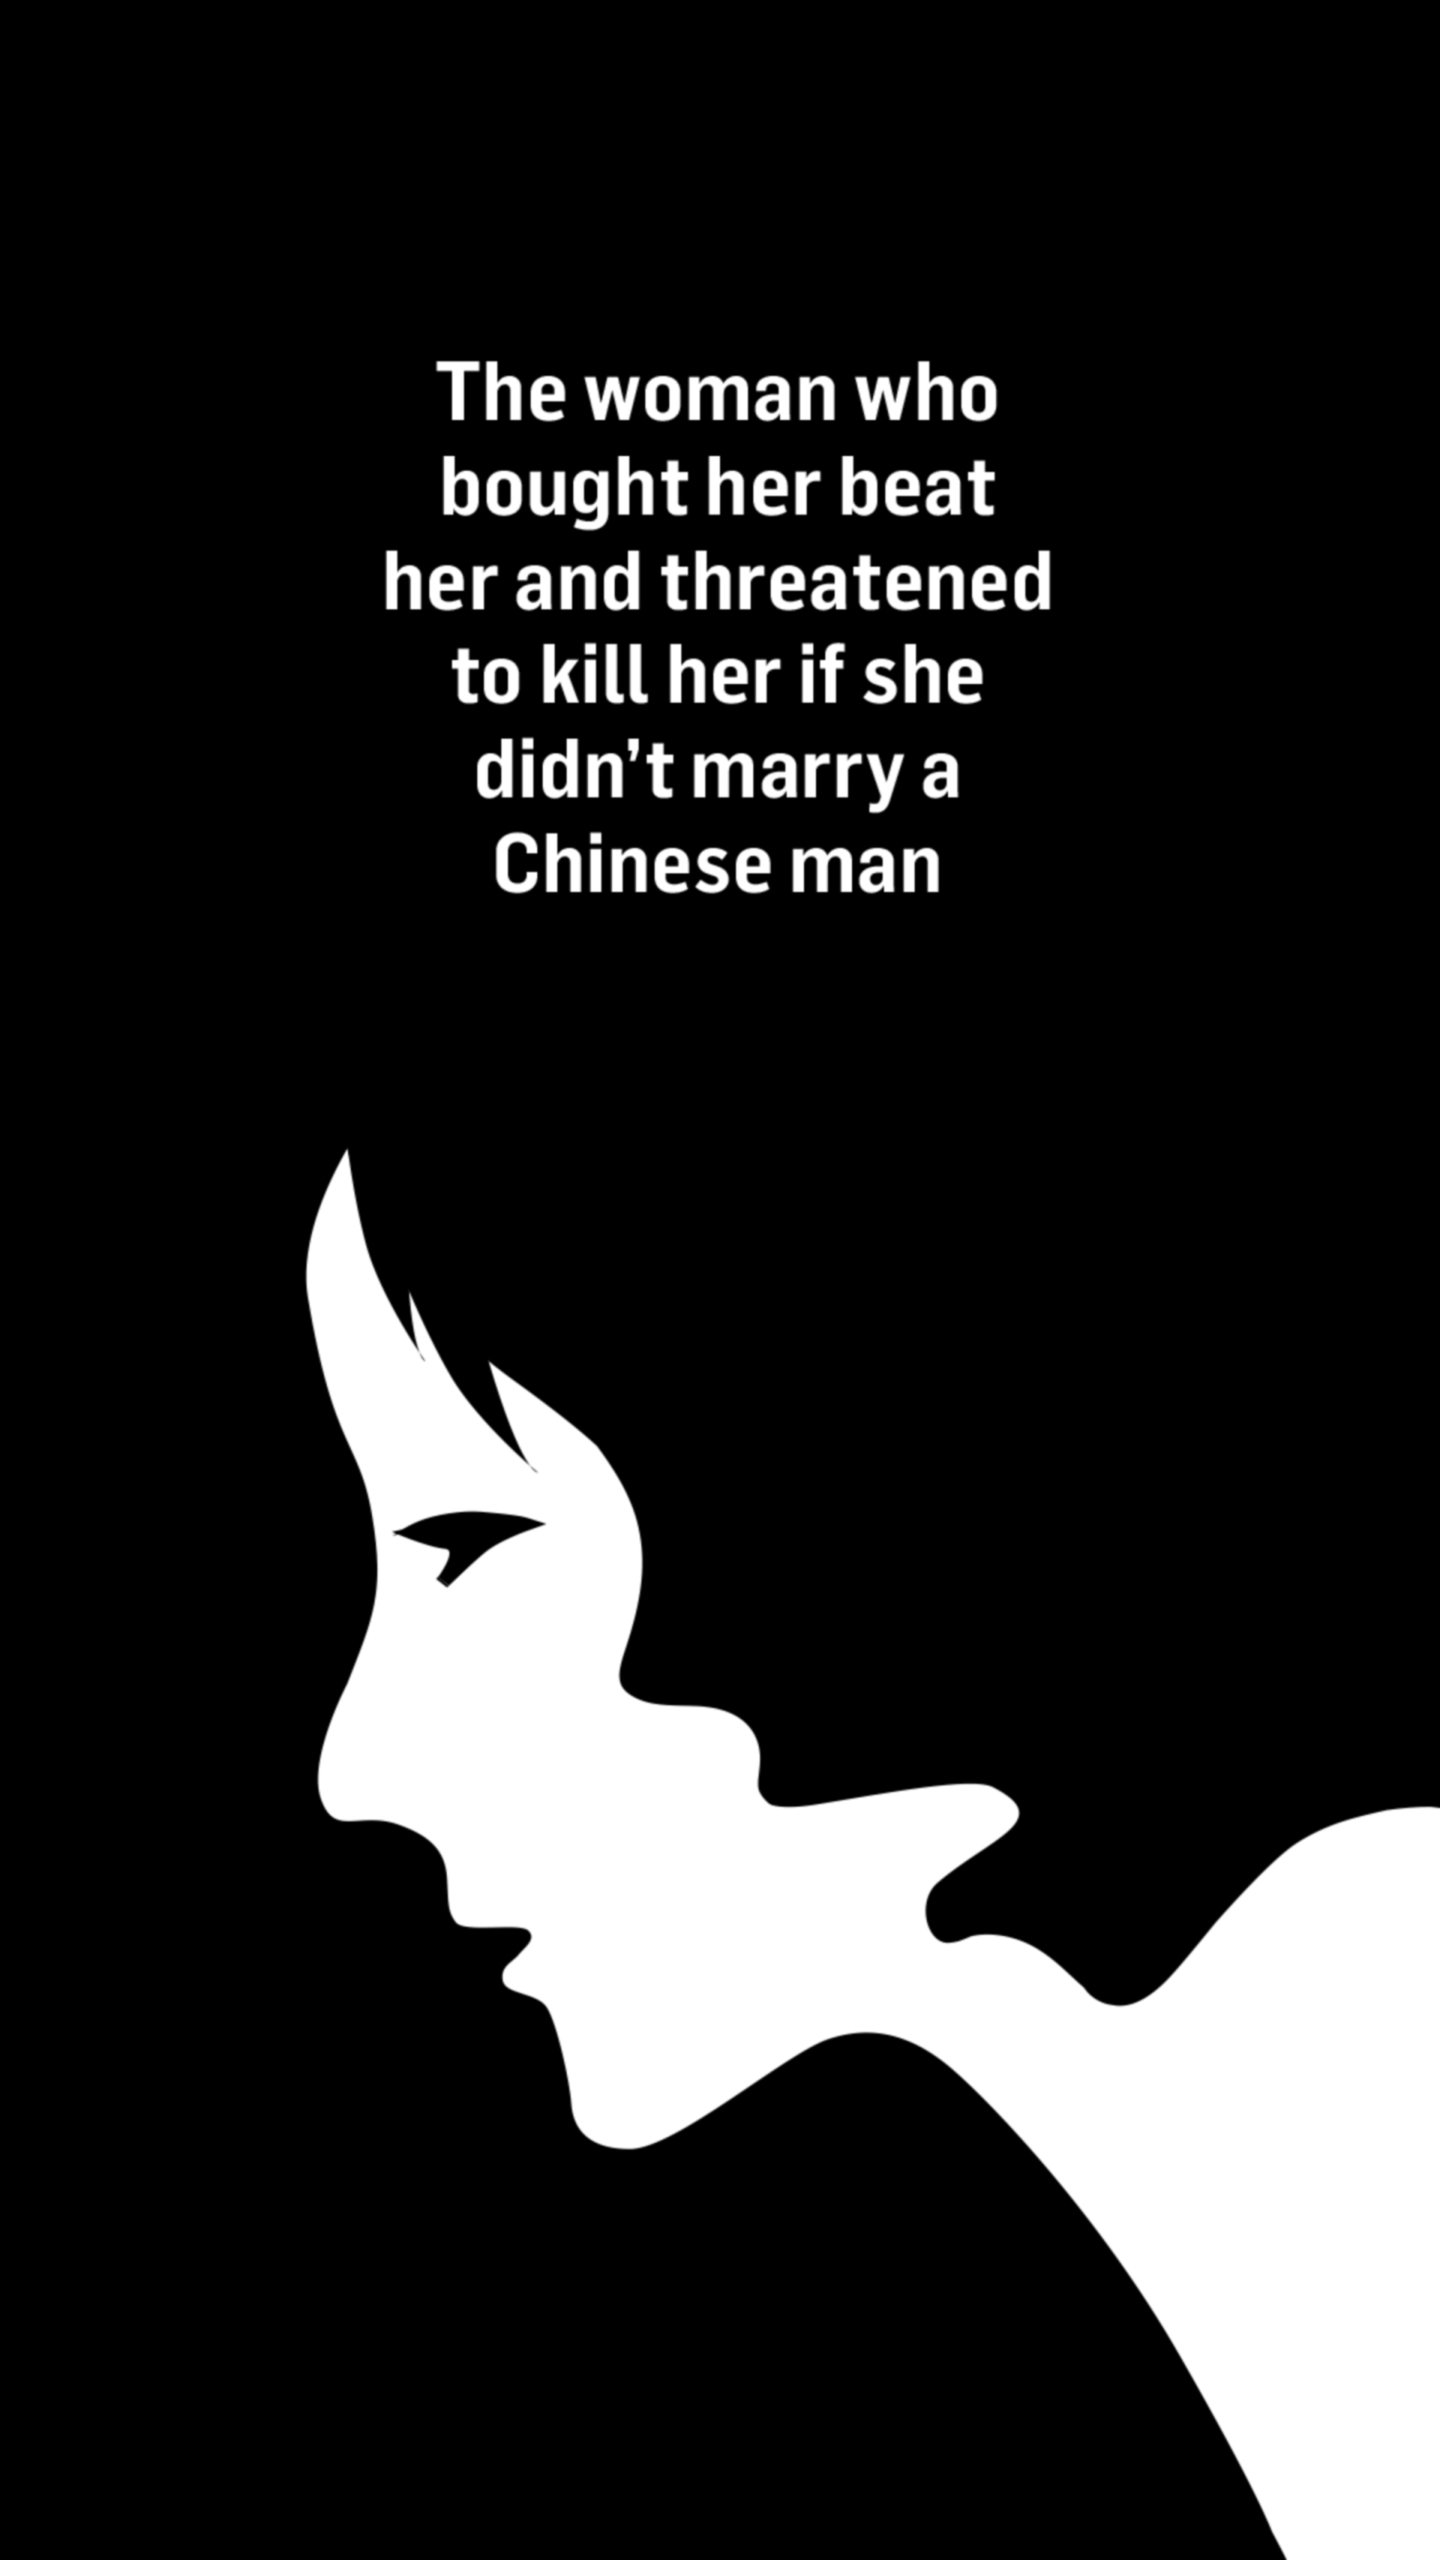 An illustration of a woman's face and a shadow. Words above the image read: The woman who bought her beat her and threatened to kill her if she didn't marry a Chinese man.